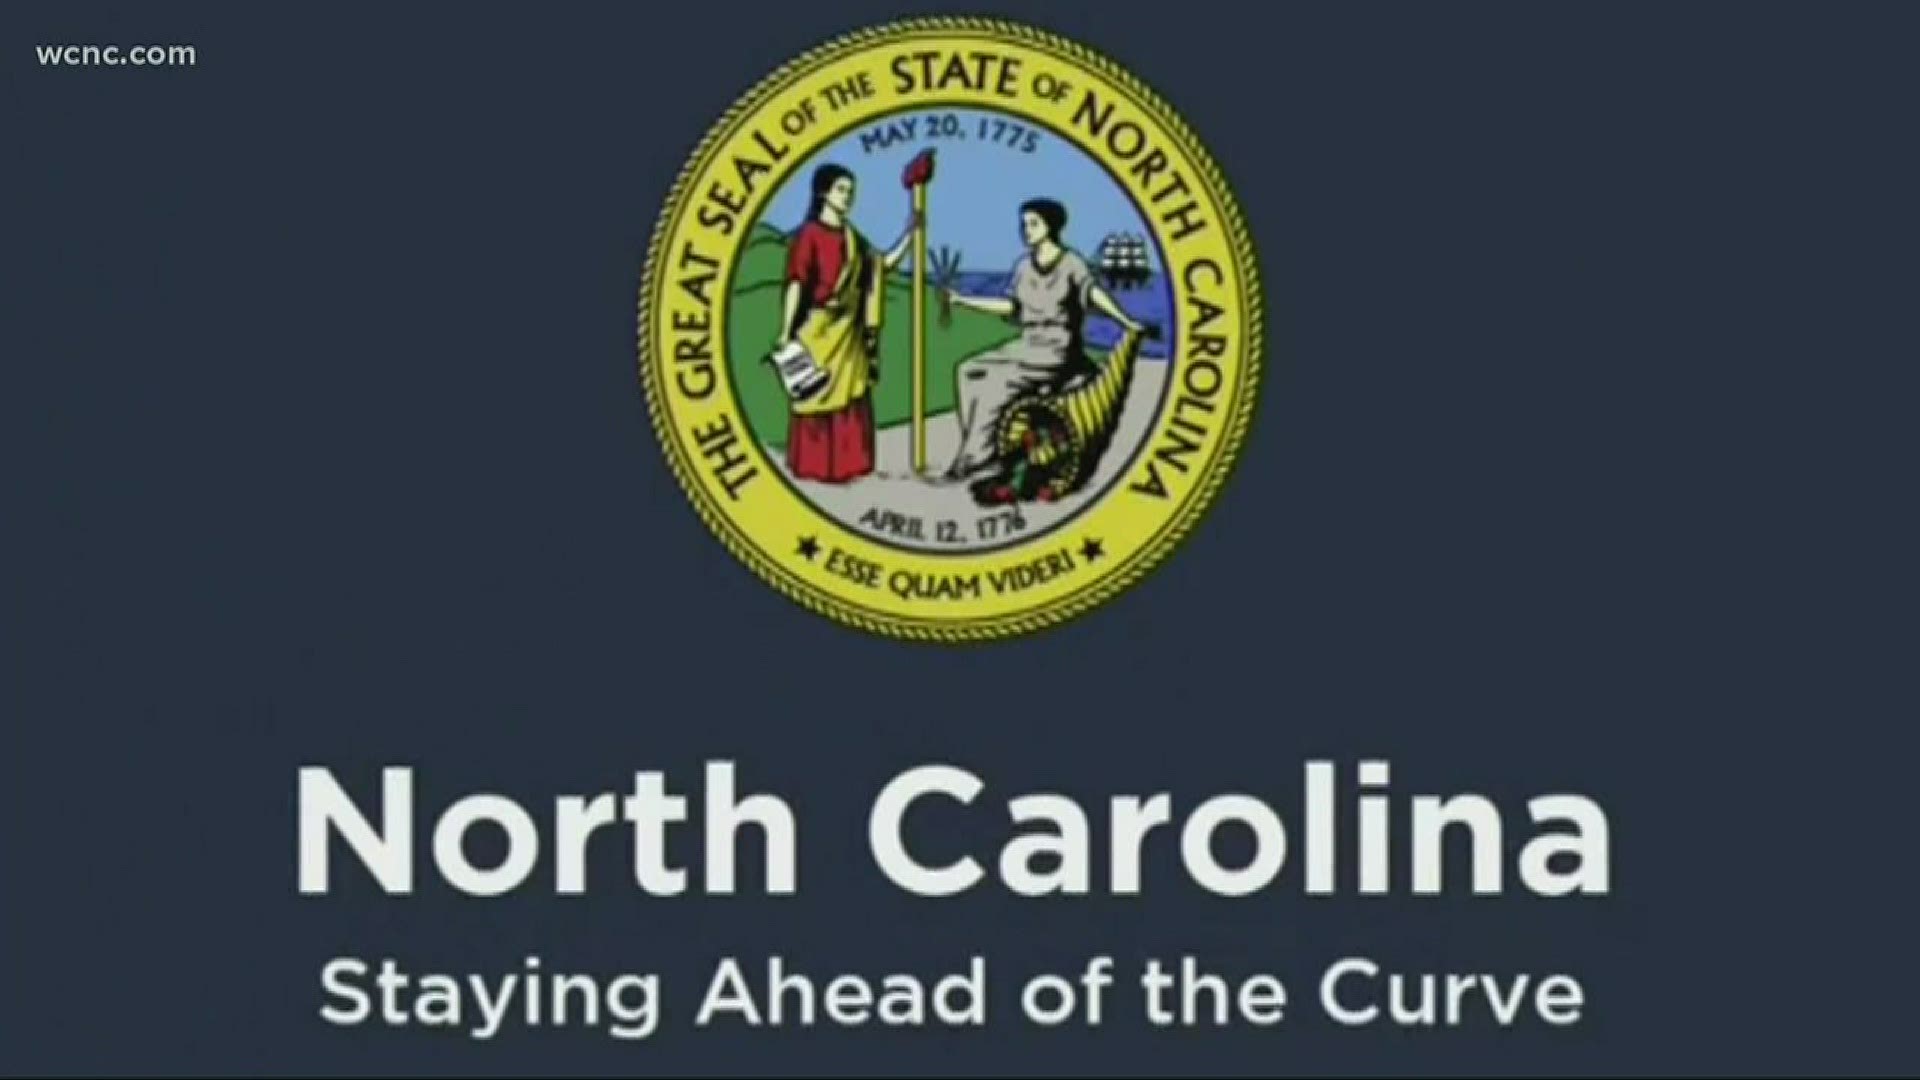 Governor Cooper extends order to May 8, nine days past April 29 date.